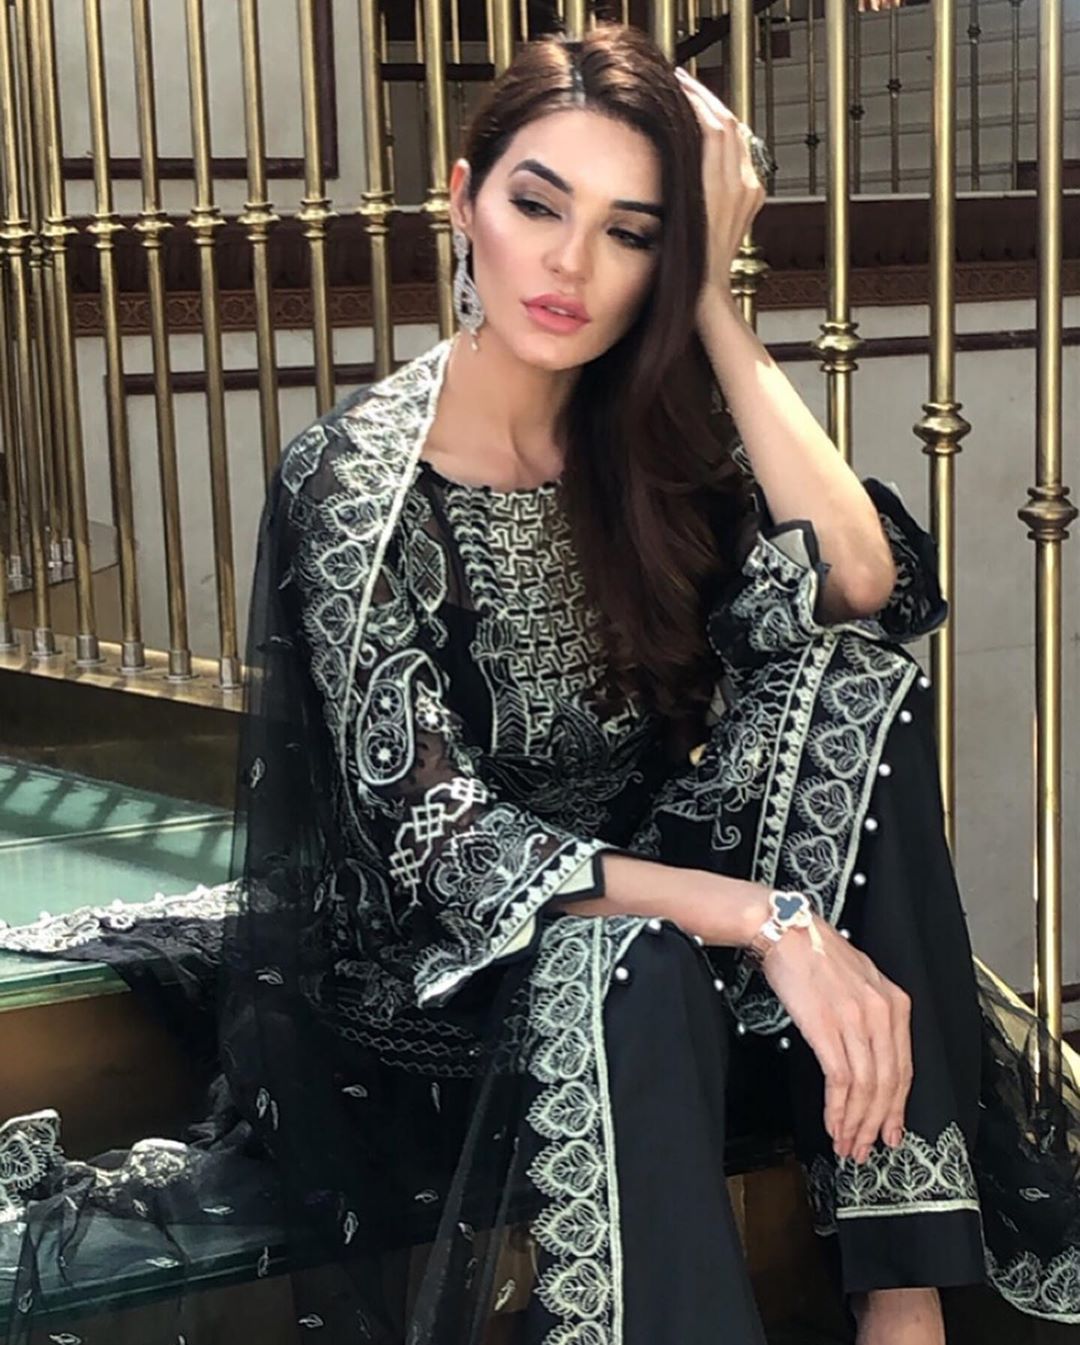 New Awesome Pictures of Actress Sadia Khan